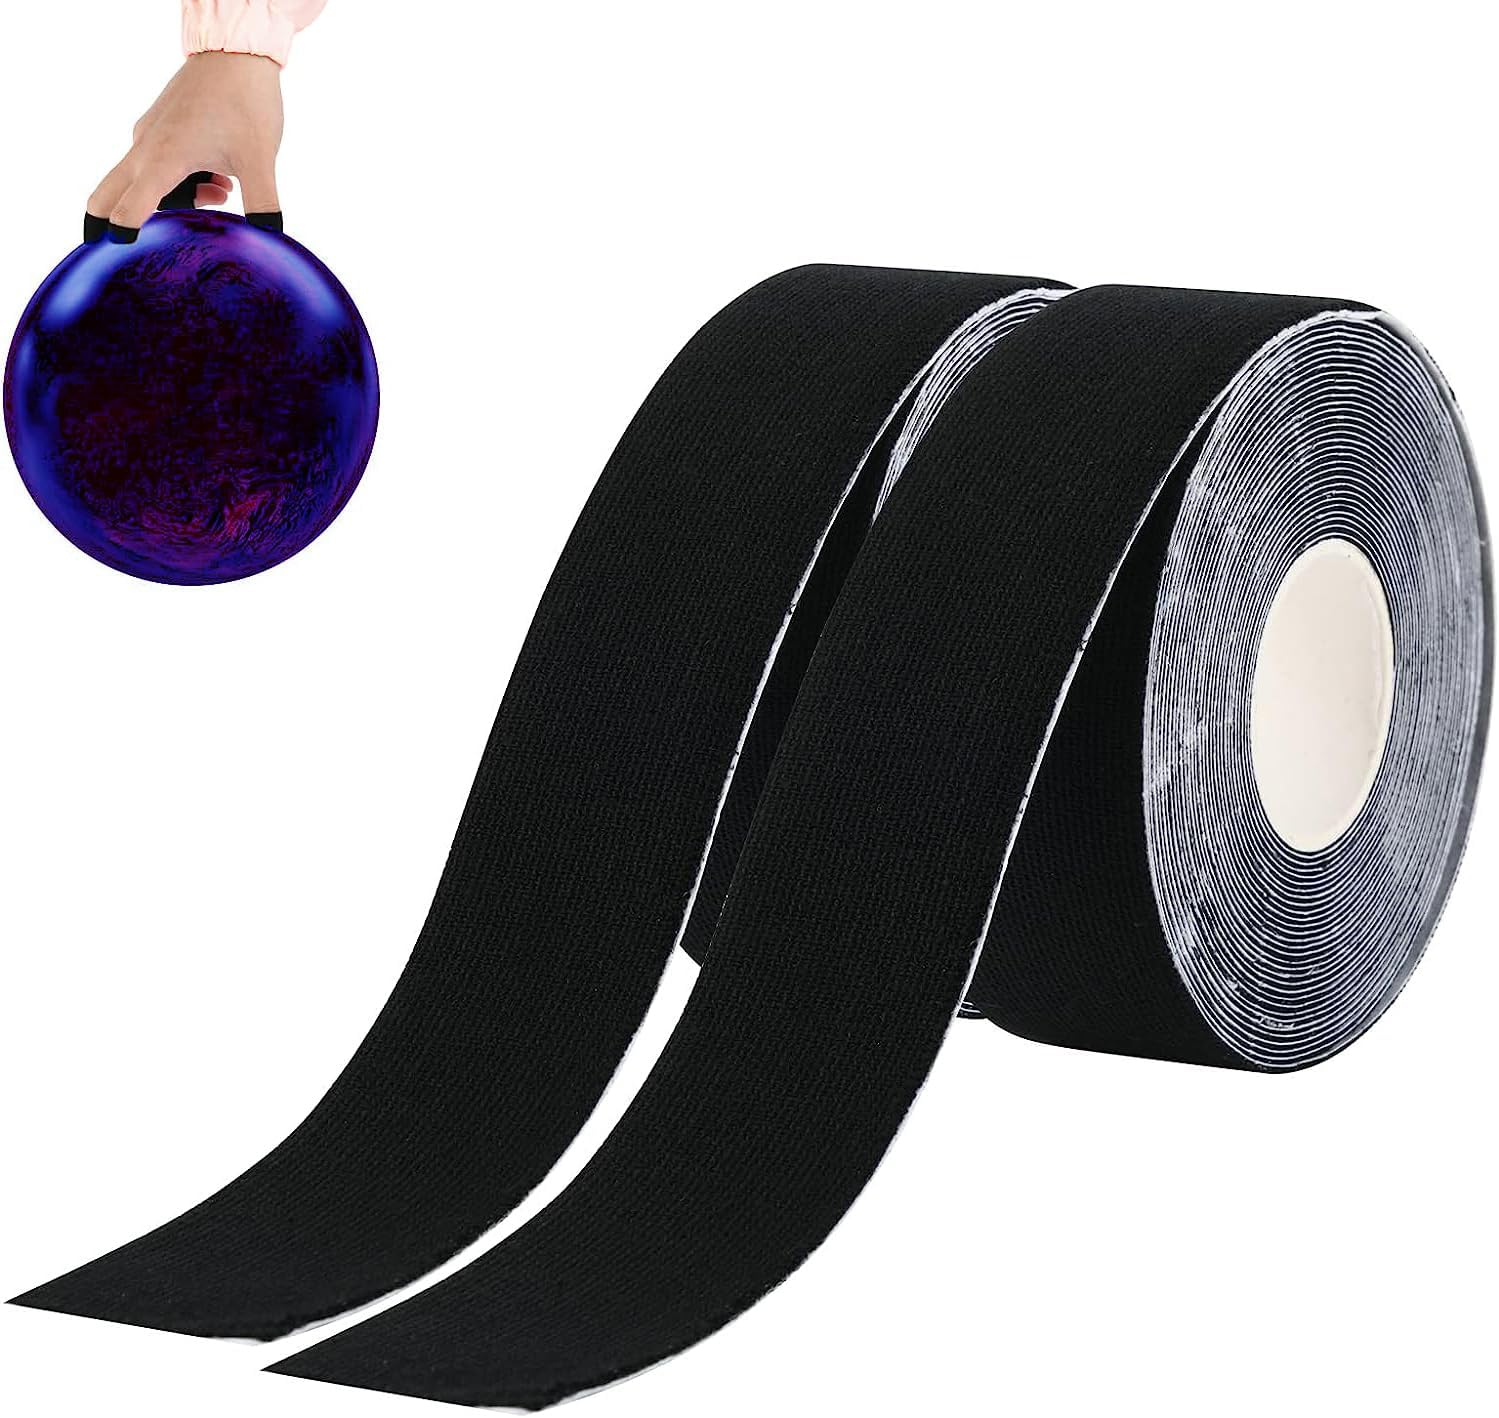 USUNQE Pack of 2 Rolls Elastic Bowling Ball Thumb Tape Bowling Finger Tape Thumb Tape Protective Bowling Accessories for Bowler Sport Exercise Workout, Each Roll 2.5 cm x 5m